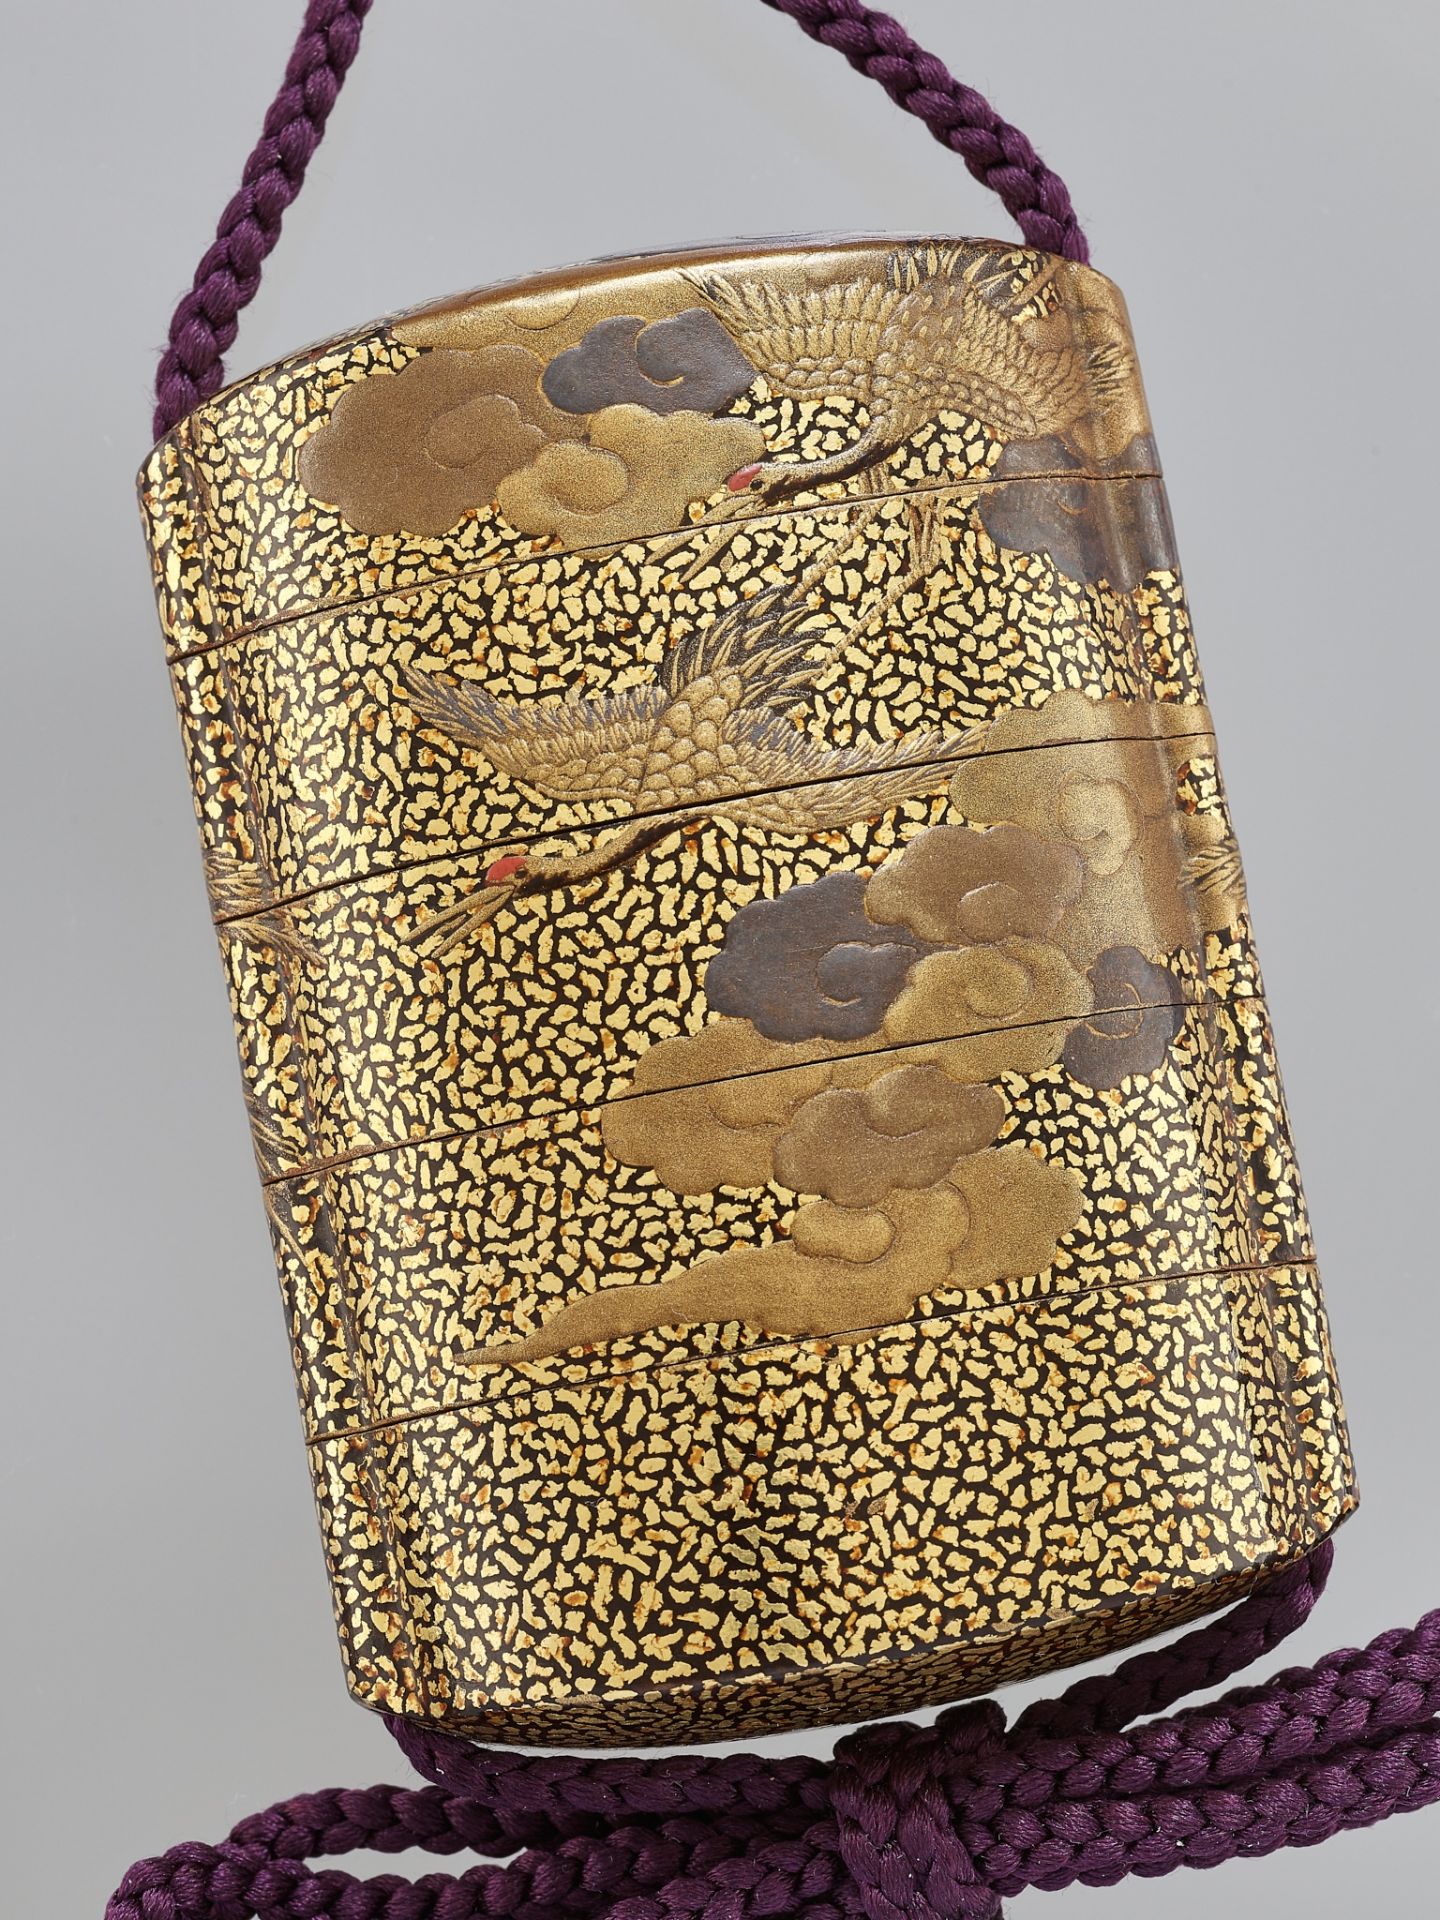 A LACQUER FOUR-CASE INRO DEPICTING CRANES WITH EN SUITE OJIME AND NETSUKE - Image 5 of 6